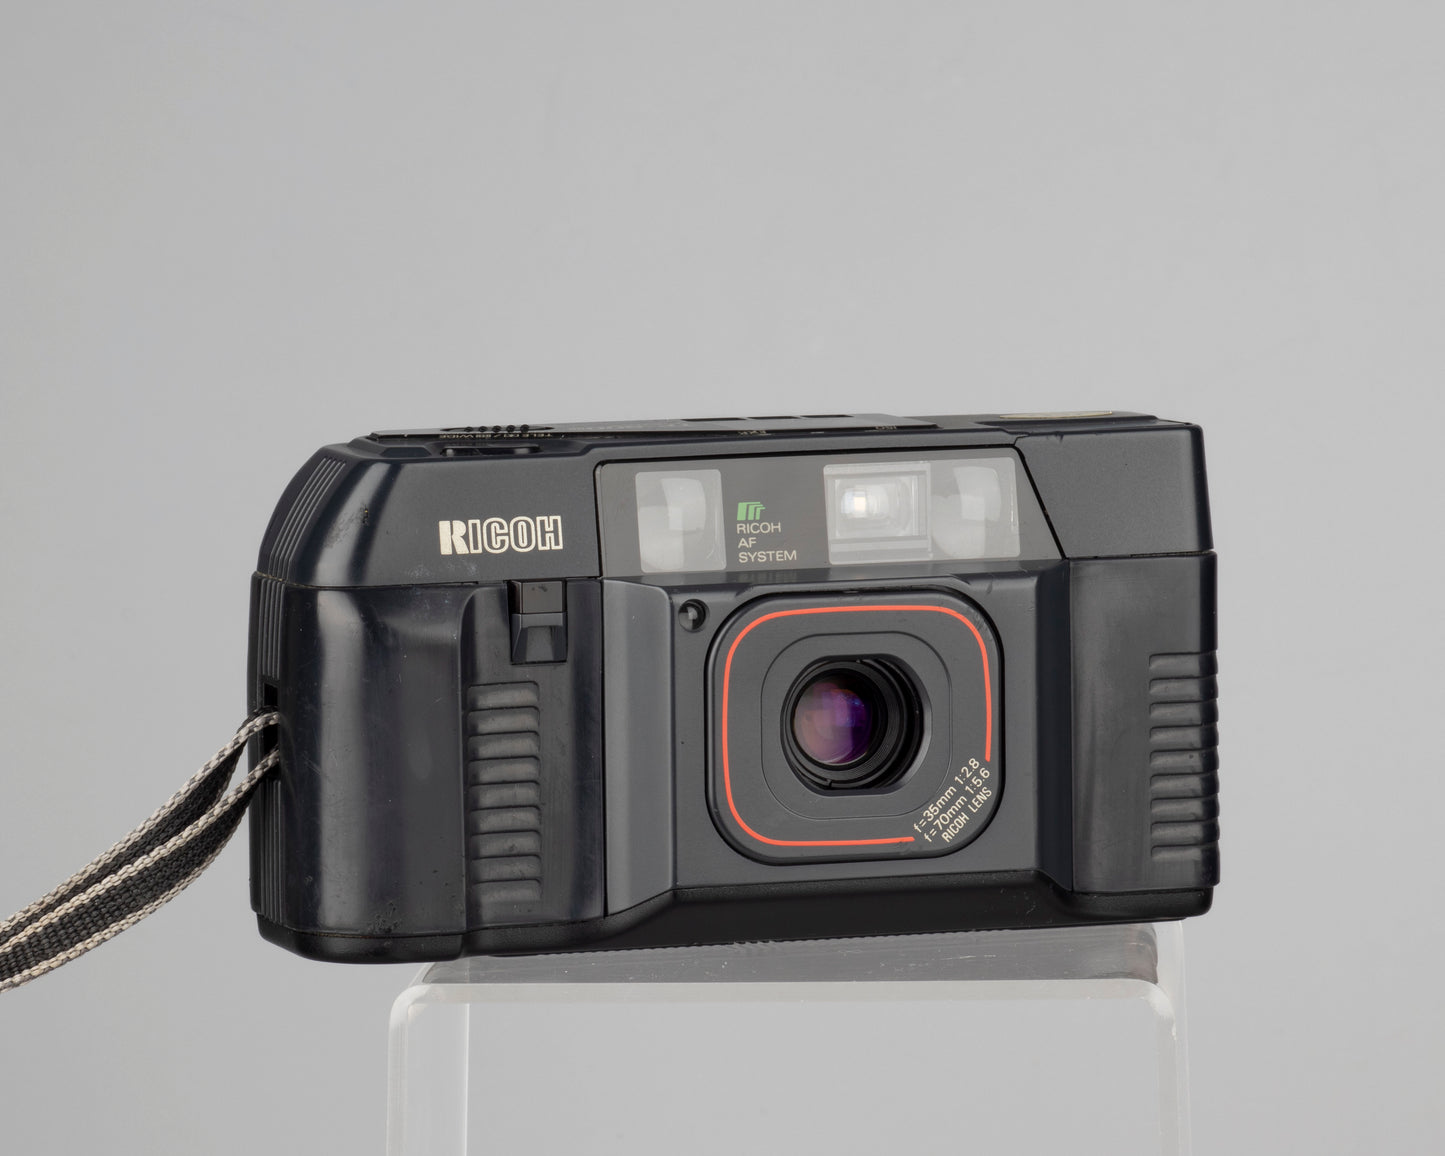 The Ricoh TF-900D (aka TF-500) is a superb 35mm point-and-shoot from the late 1980s featuring a wide angle 35mm f2.8 and a tele 70mm f5.6 lens